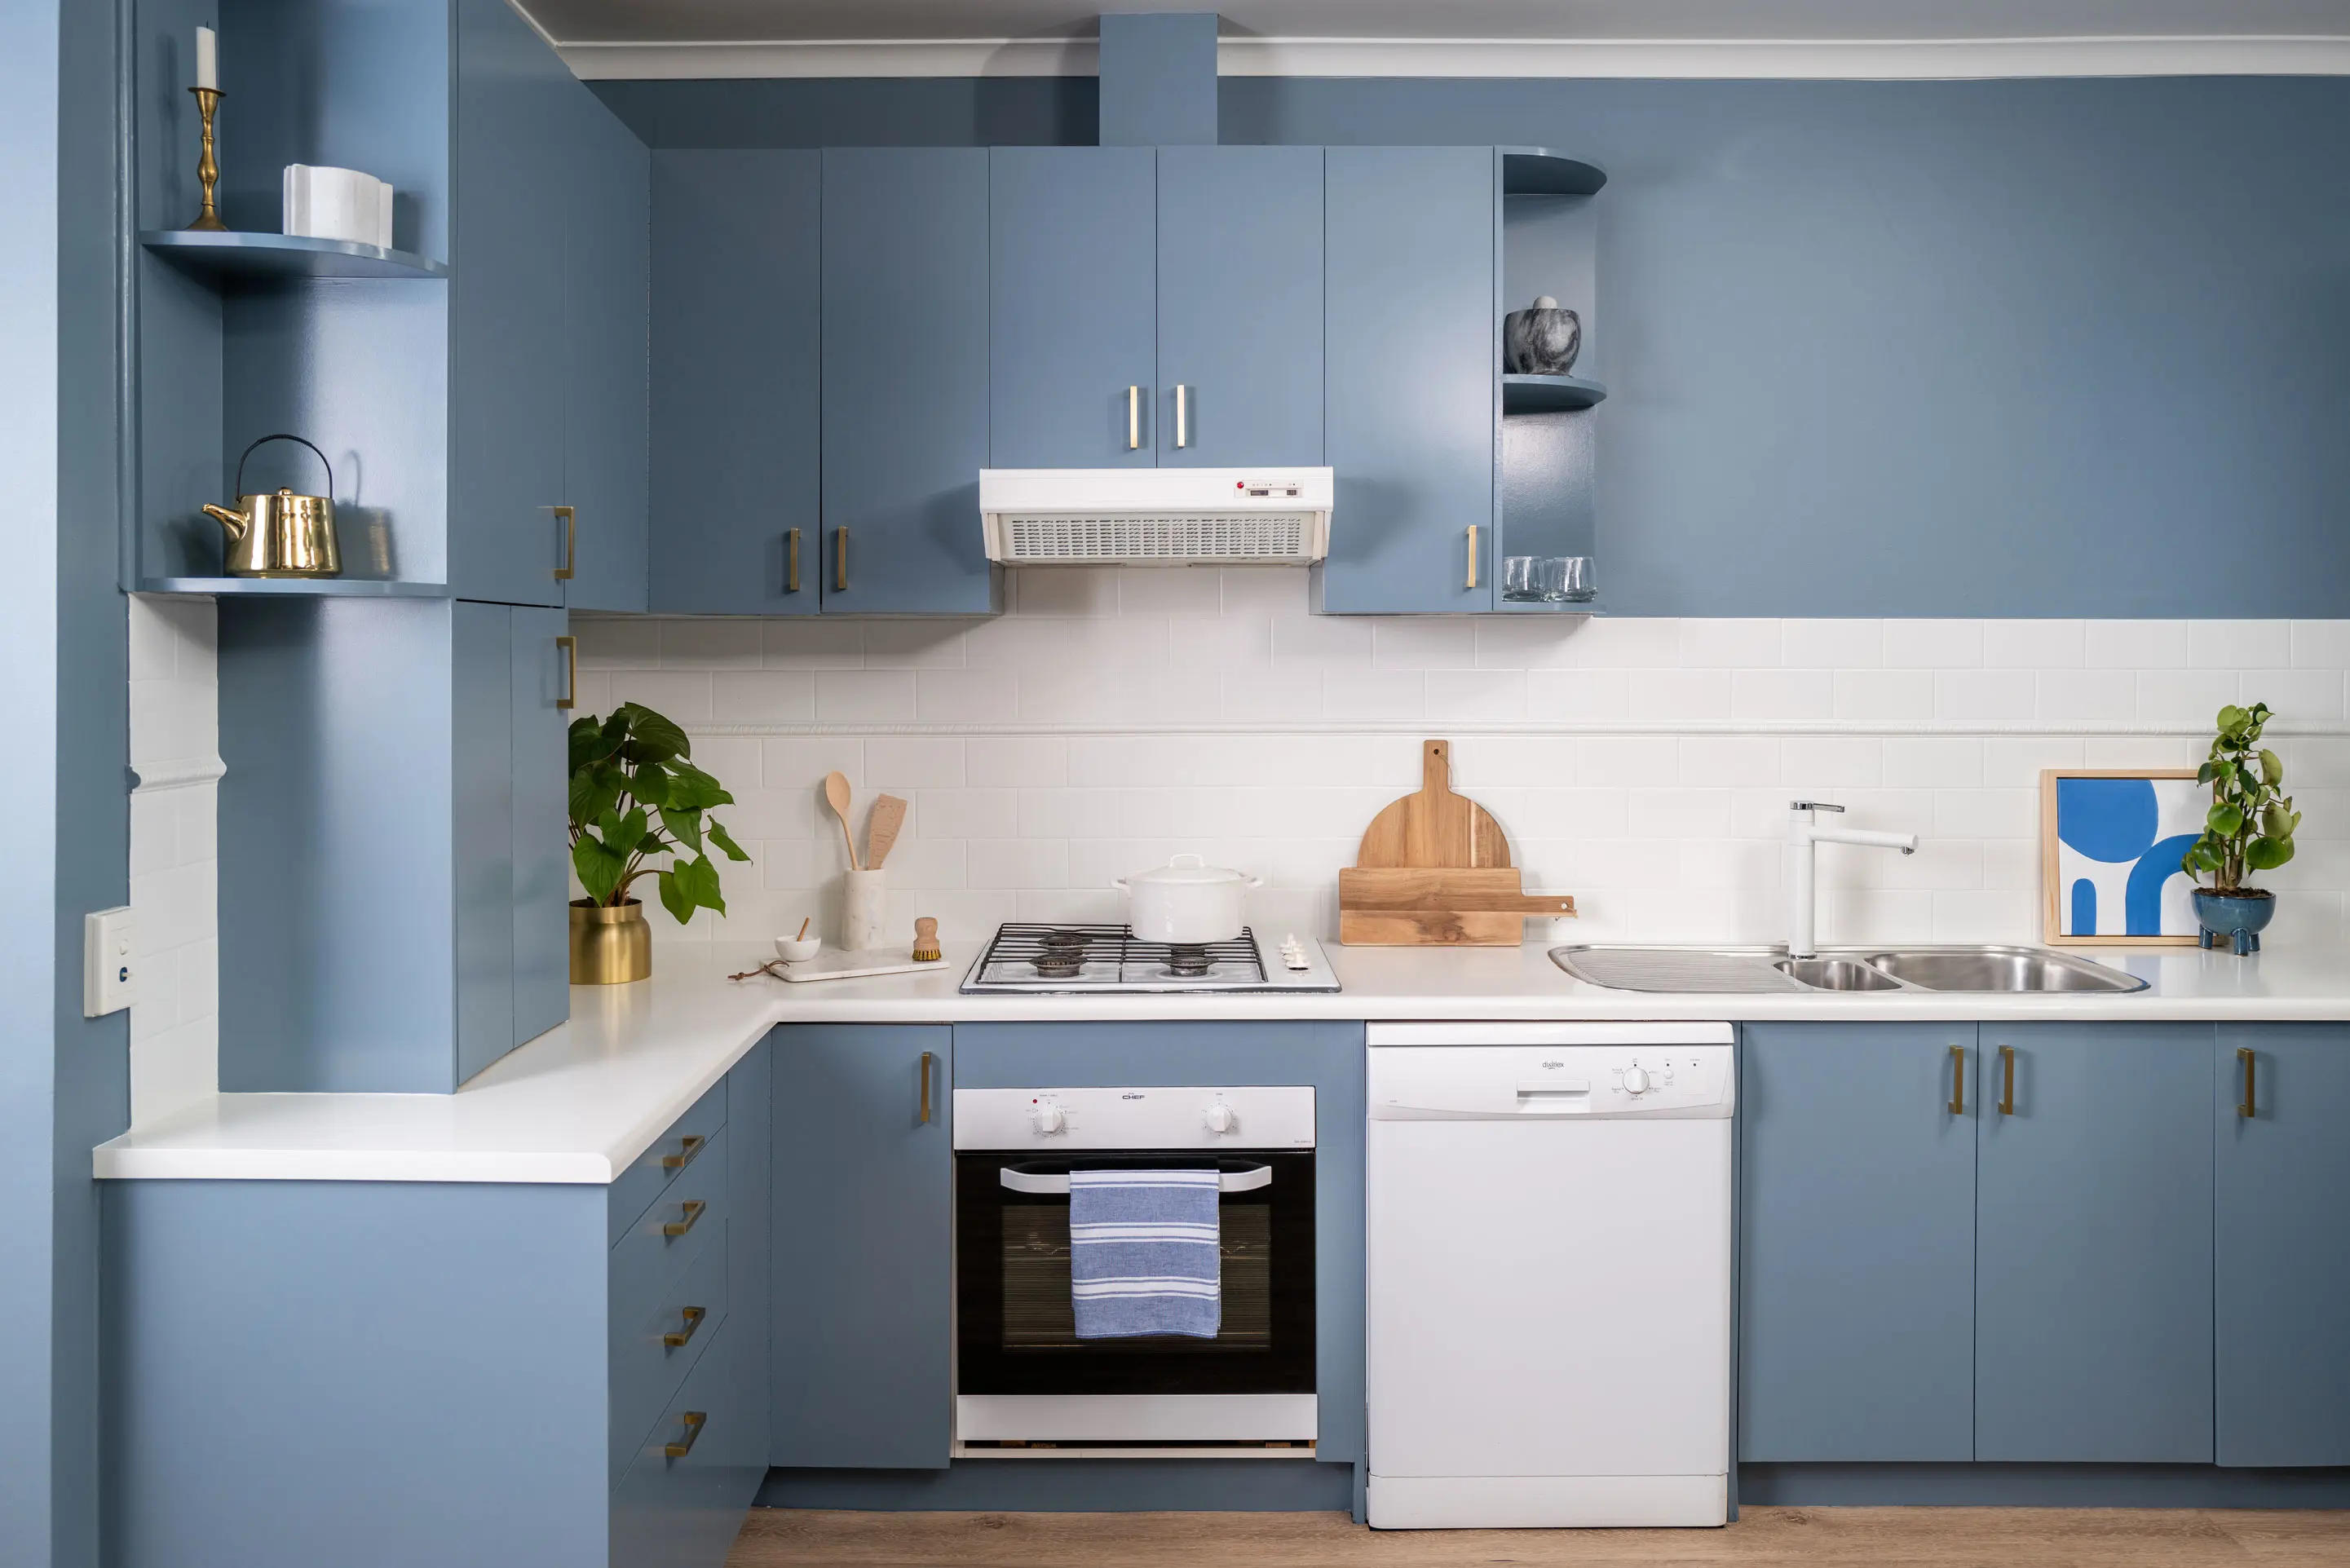 Refresh your cabinet doors with Dulux Renovation Range paint